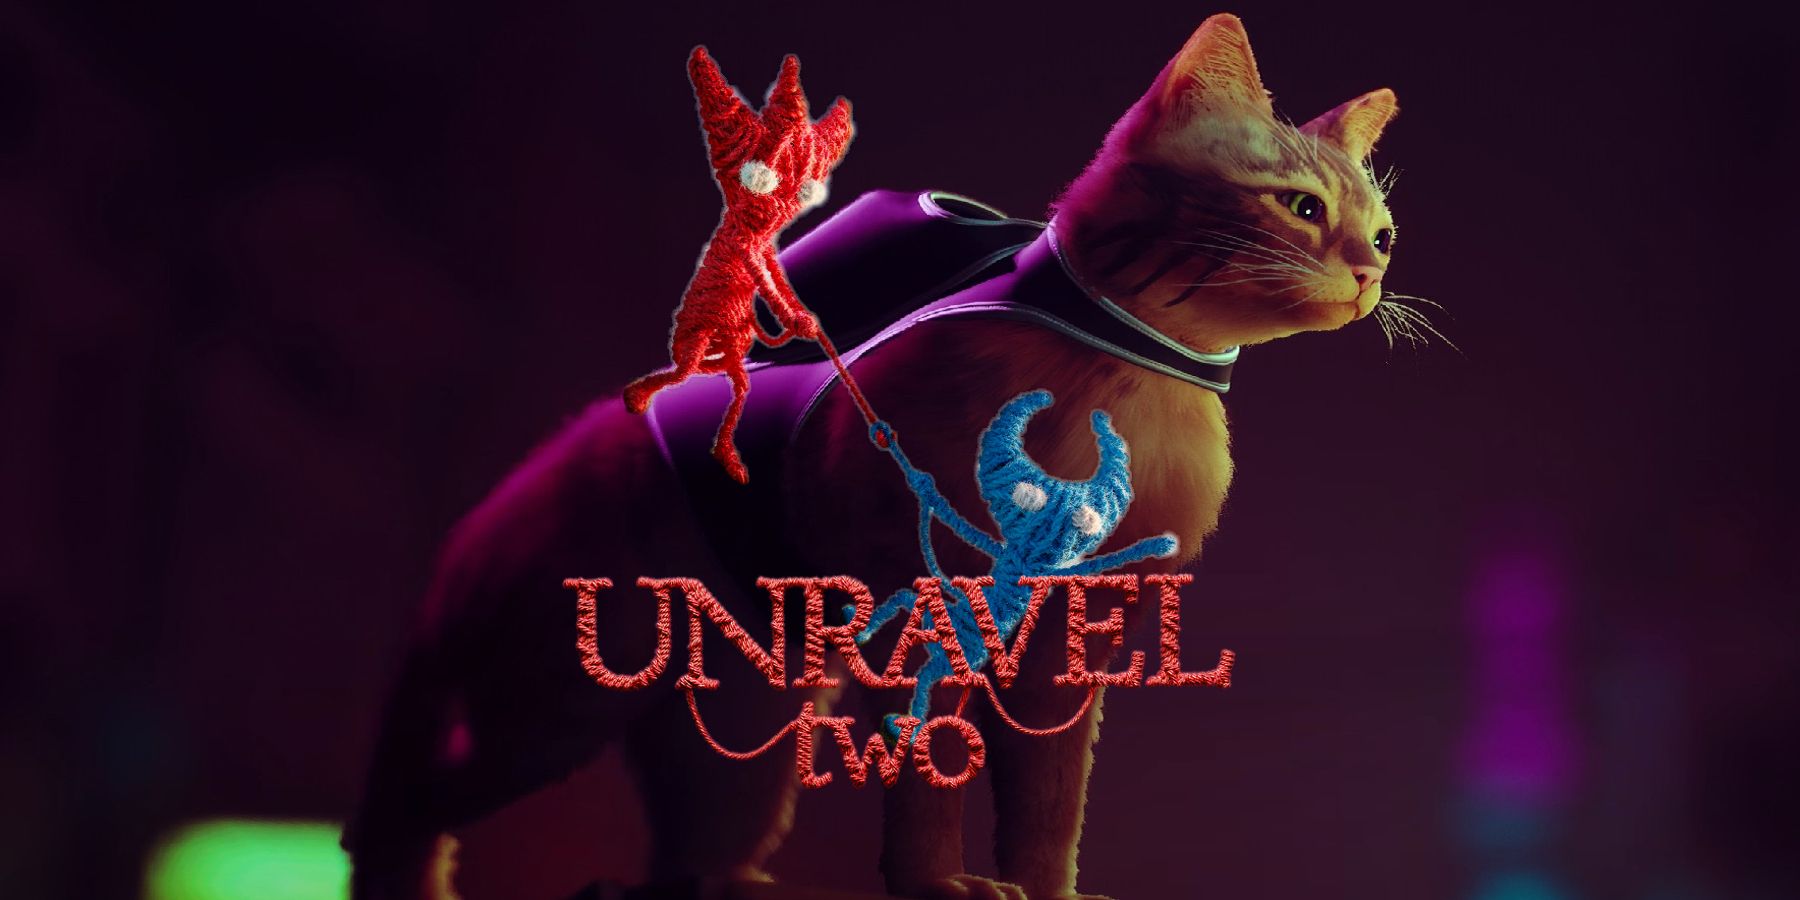 Stray and Unravel 2's logo